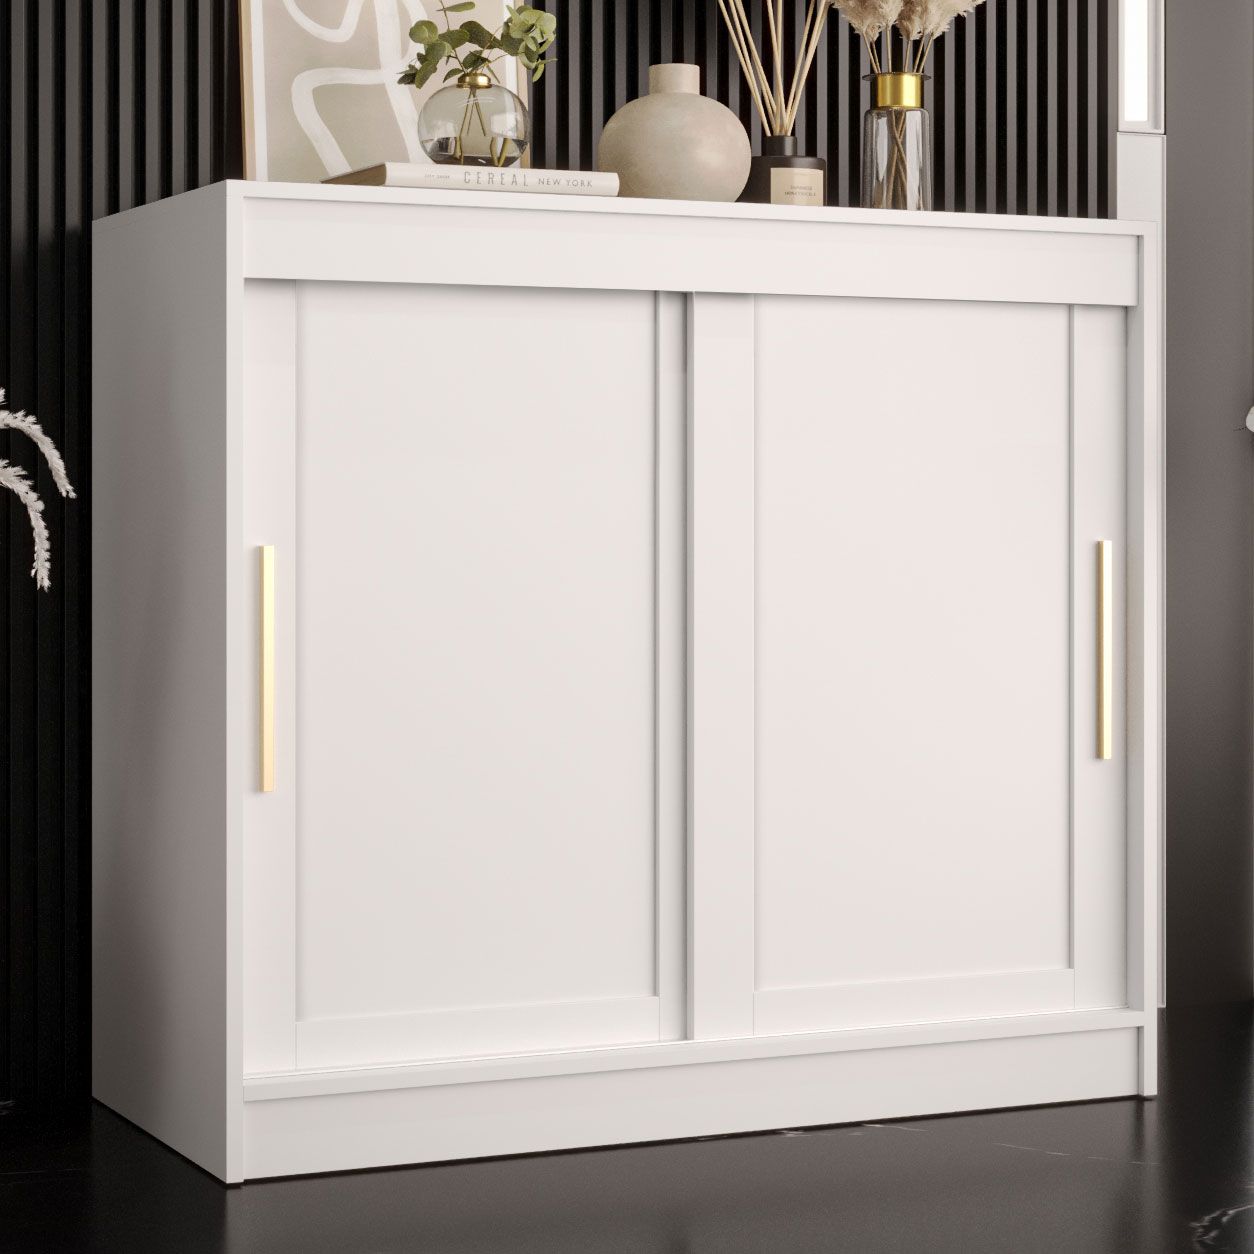 Stylish chest of drawers with four compartments Liskamm 49, Colour: White matt - Measurements: 100 x 100 x 45 cm (H x W x D), with simple design.